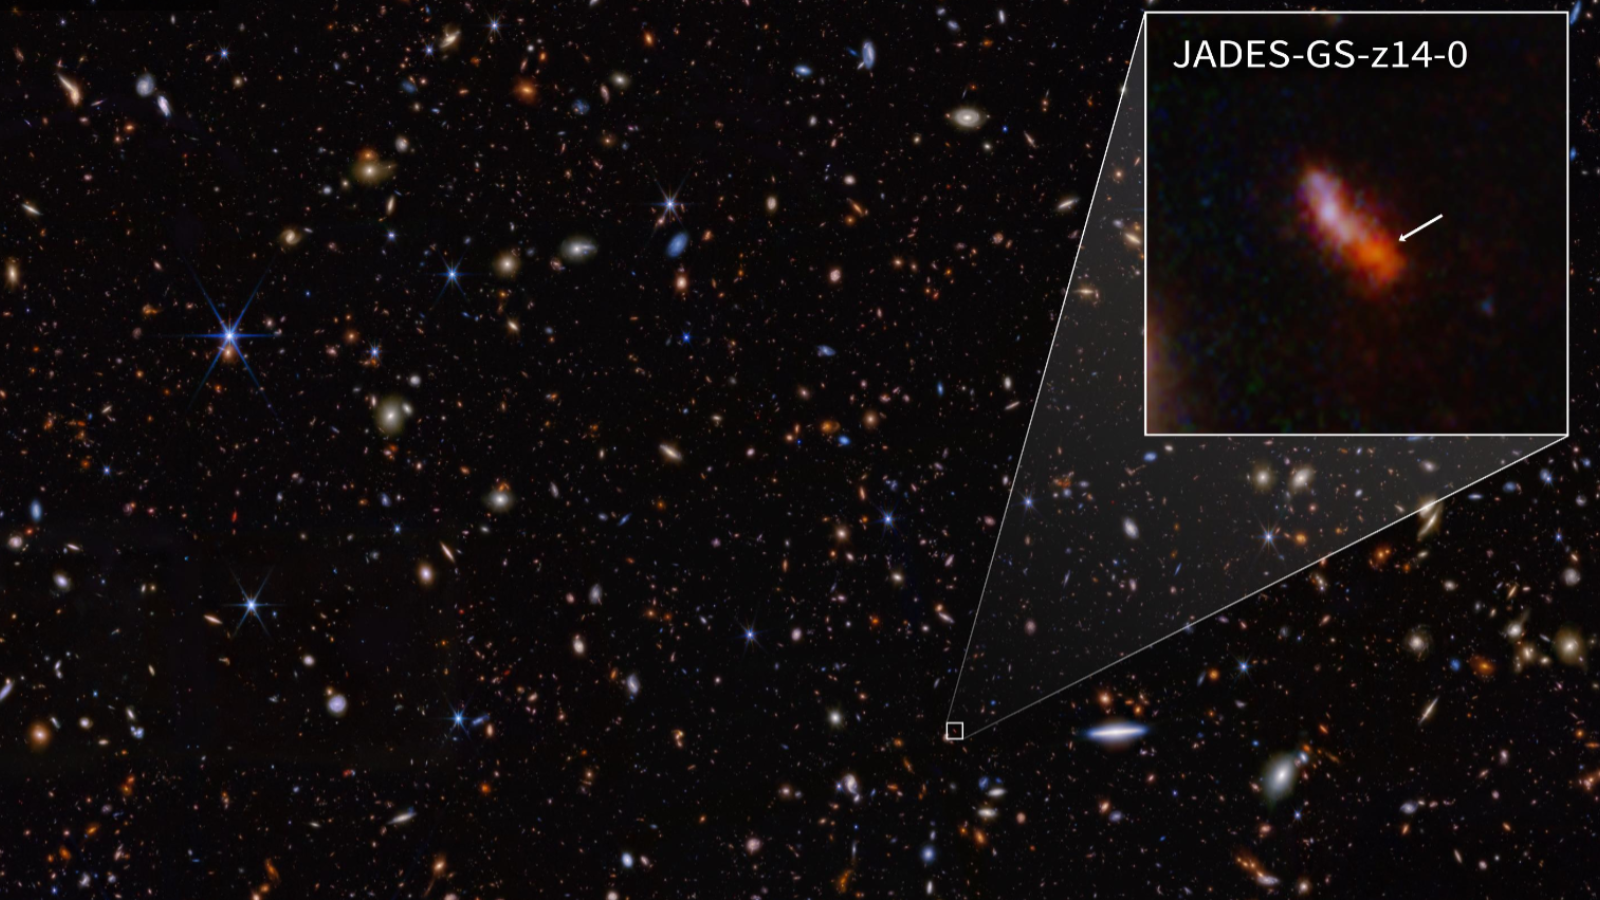 Can the James Webb Space Telescope see galaxies over the universe's horizon?